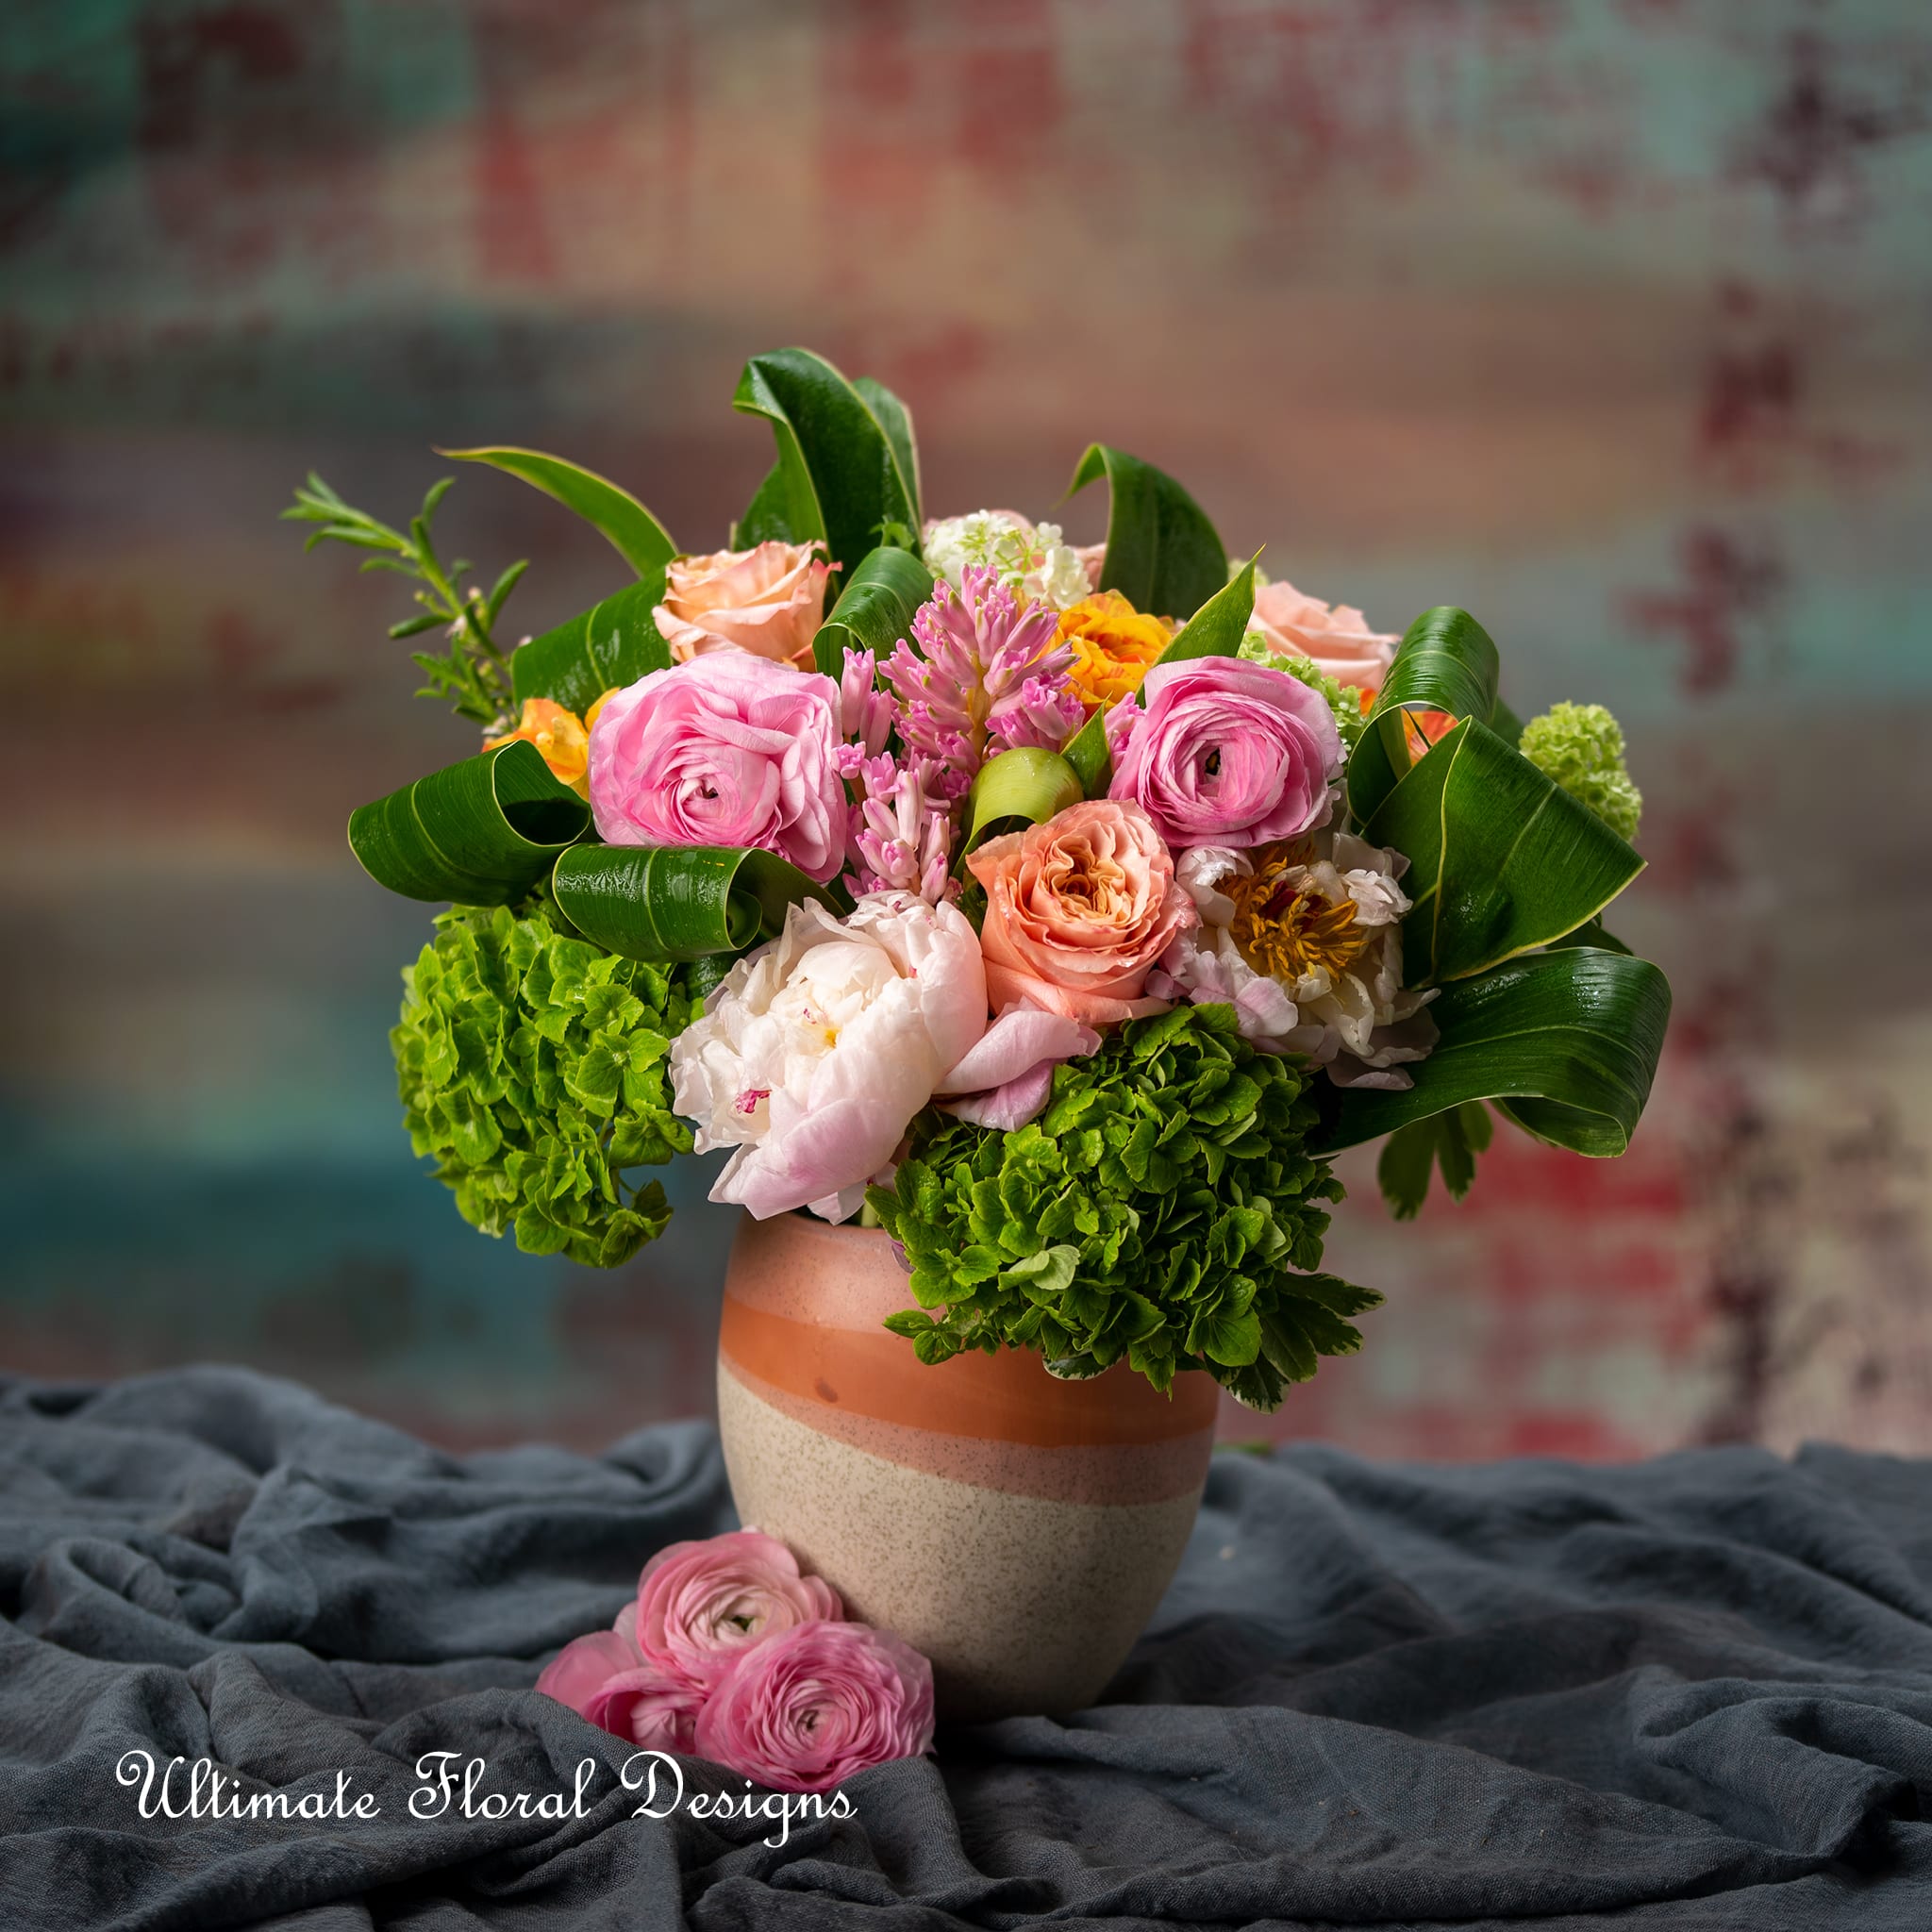 Lady in pink - “The smallest flower is a thought, a life answering to some feature of the Great Whole, of whom they have a persistent intuition.”– Honore de Balzac Ranunculus, Peony , hyacinth , Hydrangea , Garden roses